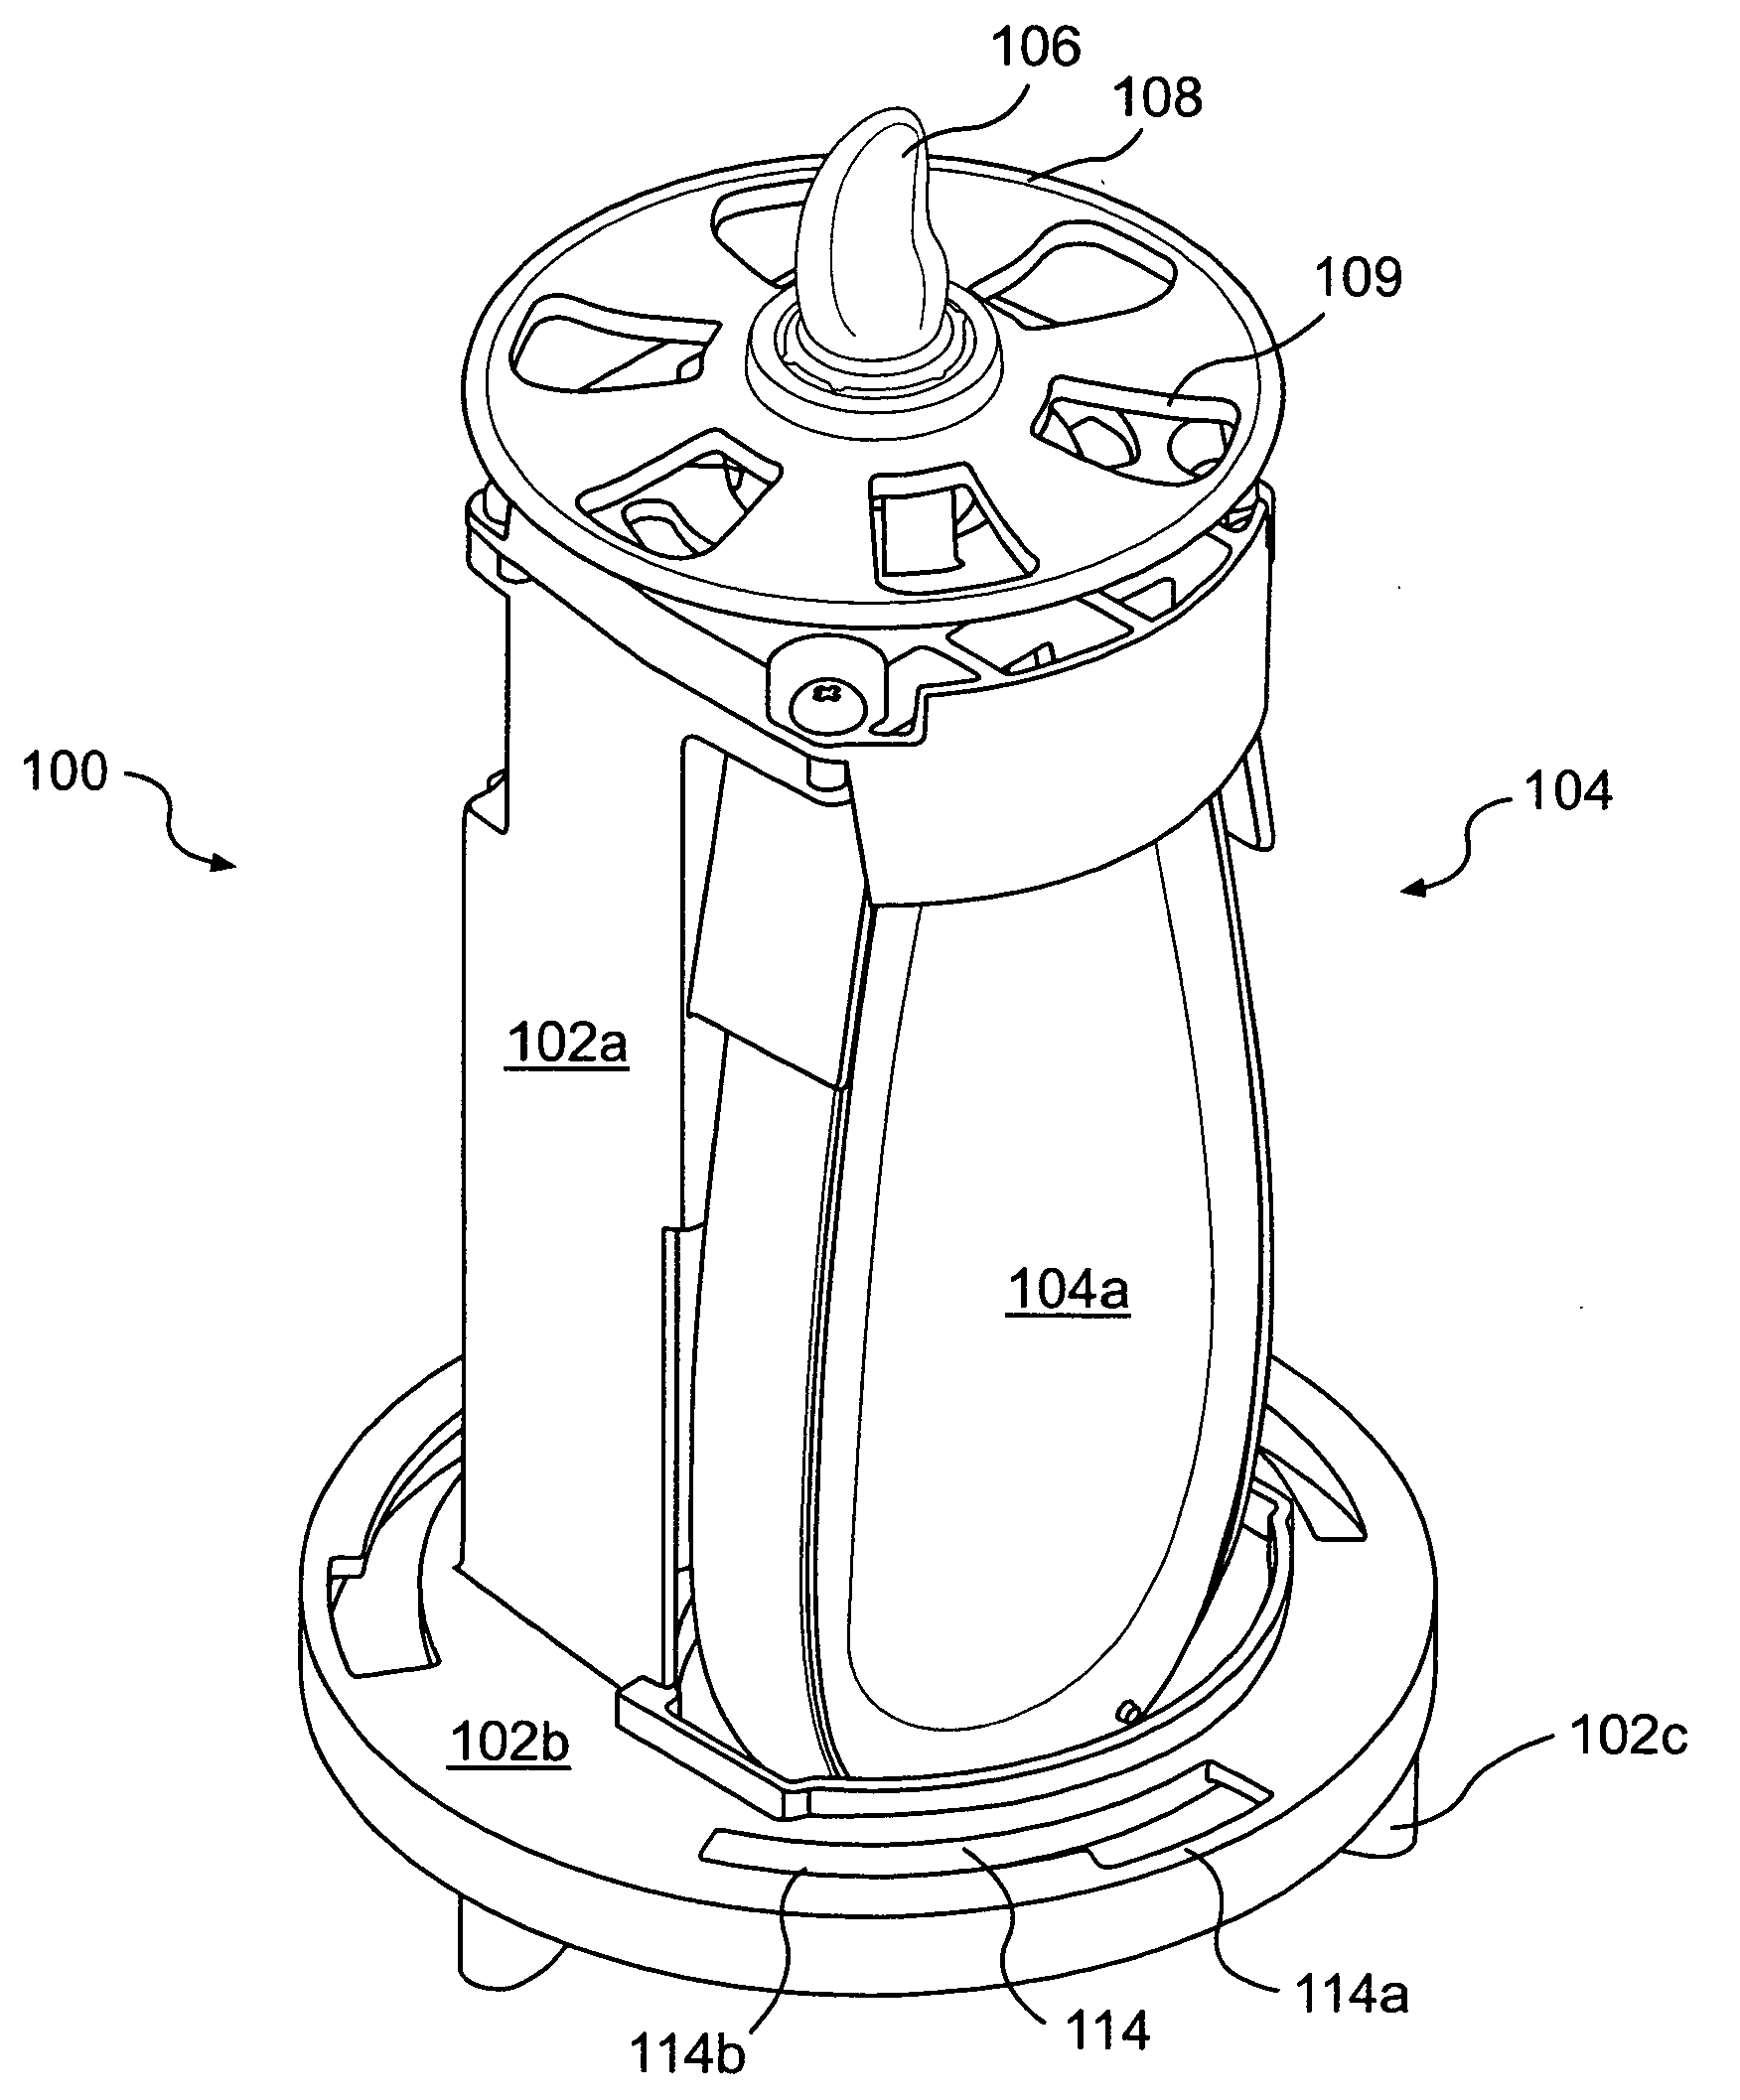 Device providing coordinated emission of light and volatile active